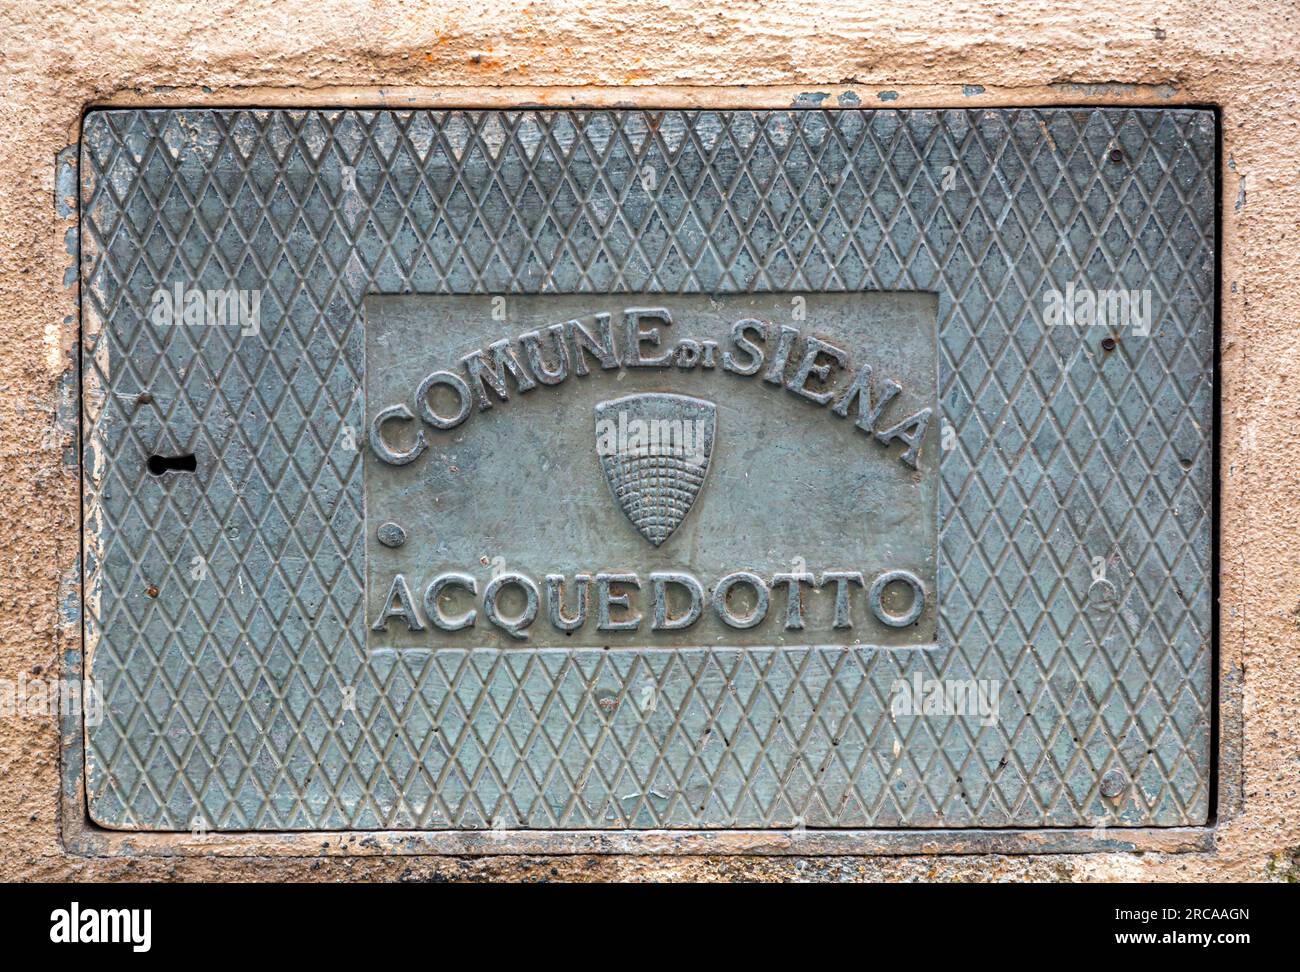 Siena, Italy - APR 7, 2022: Water sewage manhole cover with the Commune of Siena logo in Siena, Italy Stock Photo